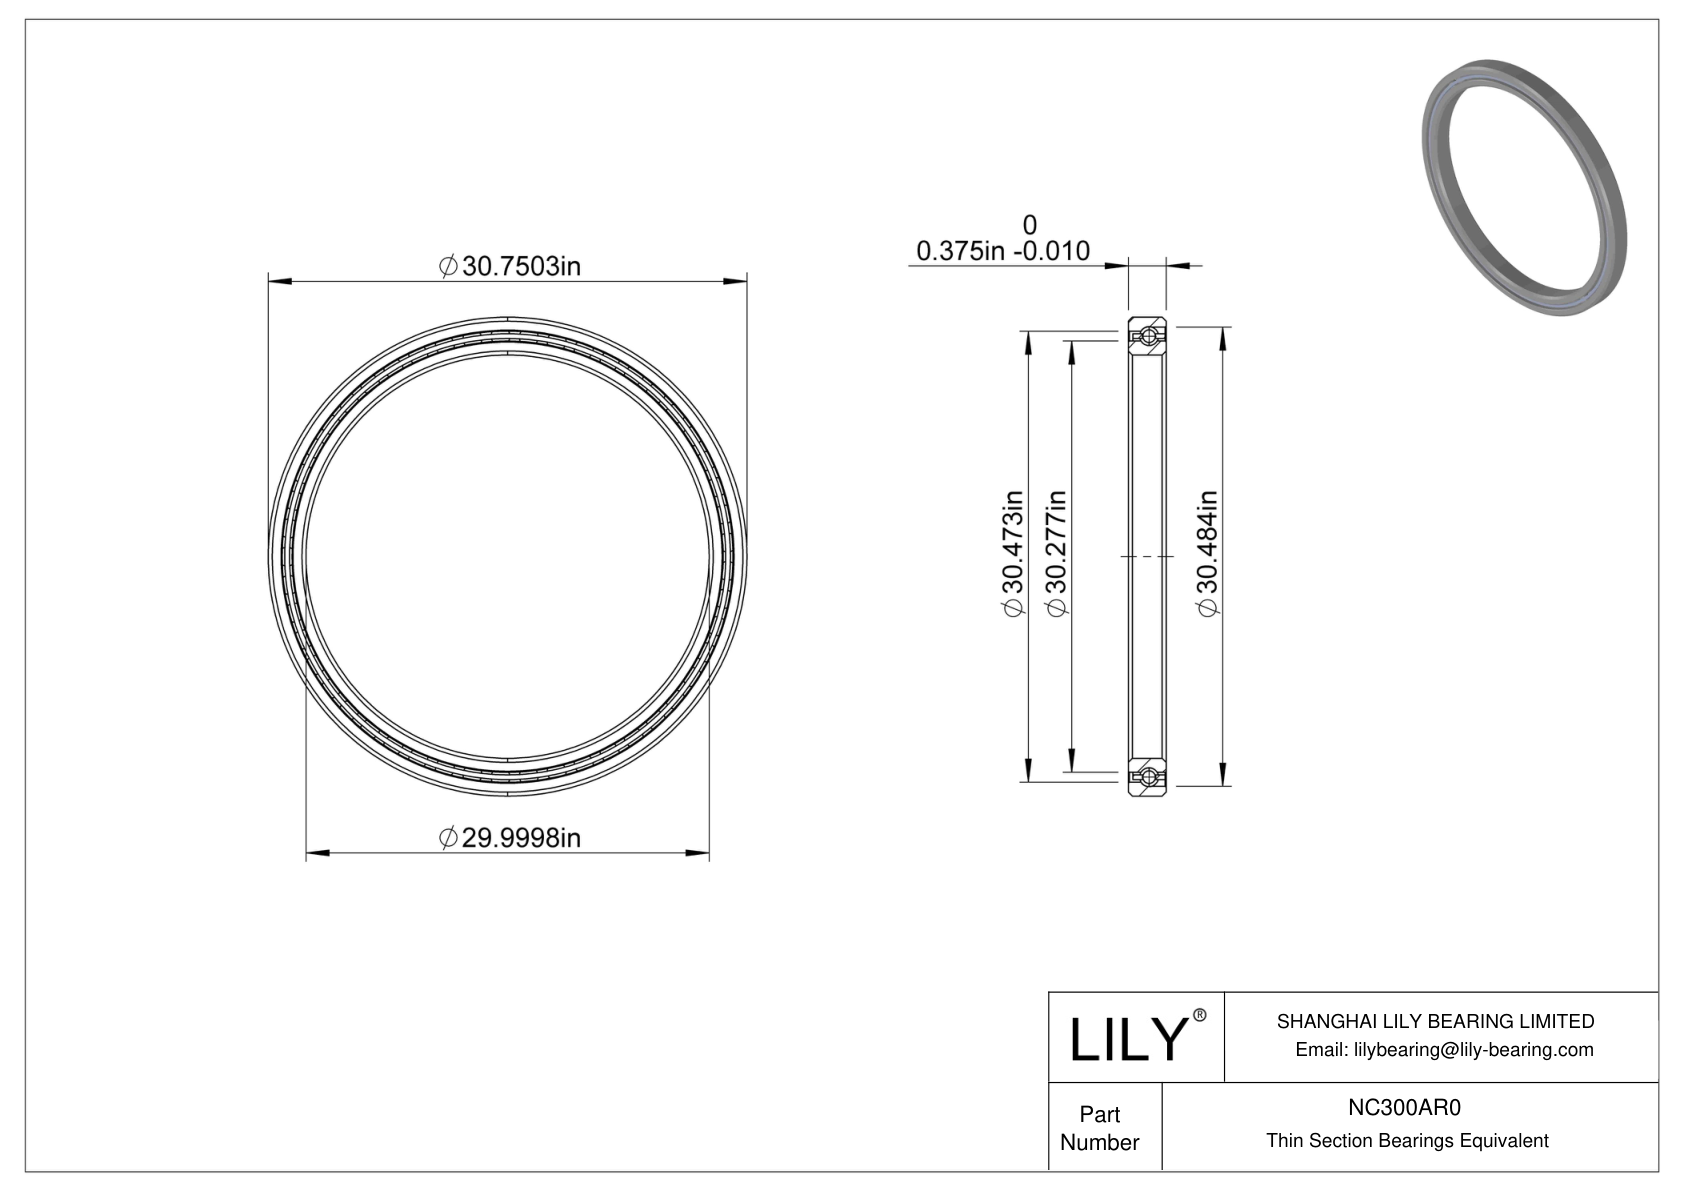 NC300AR0 Constant Section (CS) Bearings cad drawing